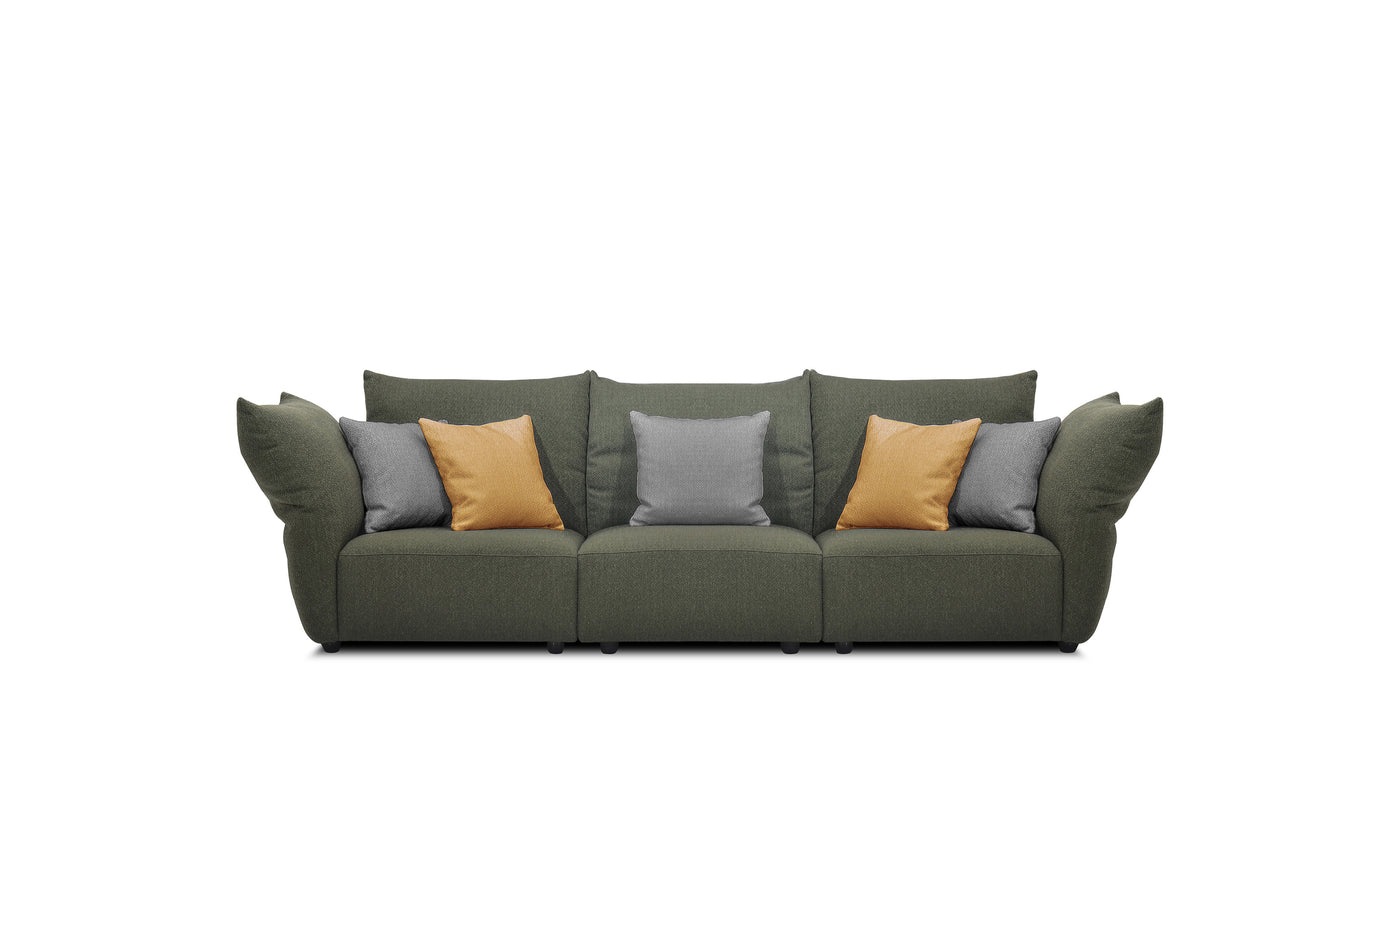 Abby 4 Seater Sofa Hoya Casa Hoyacasa.ca couch sofa bed 4 seater sectional table kitchen table love seat sofa bed matress Toronto Canada manufactures home decoration frames indoor